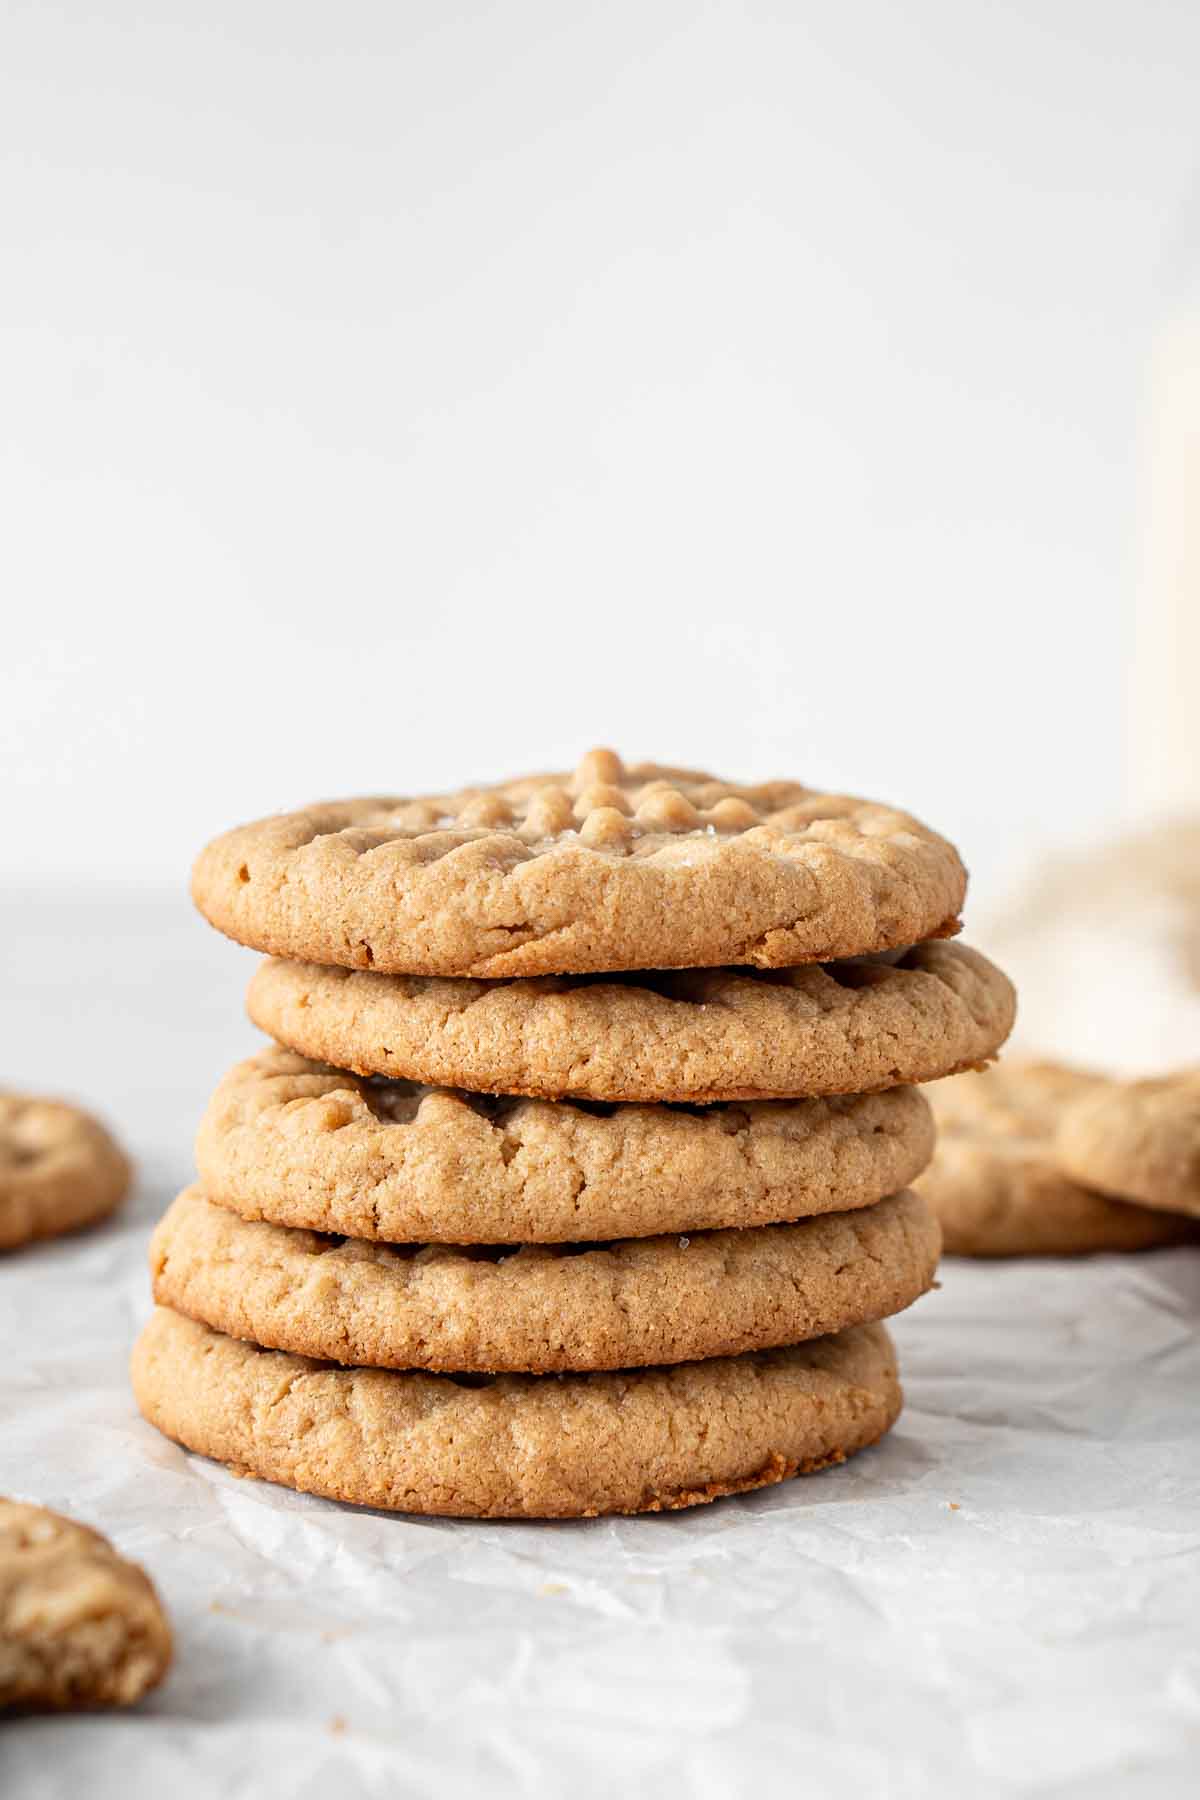 Stack of 5 peanut butter cookies.